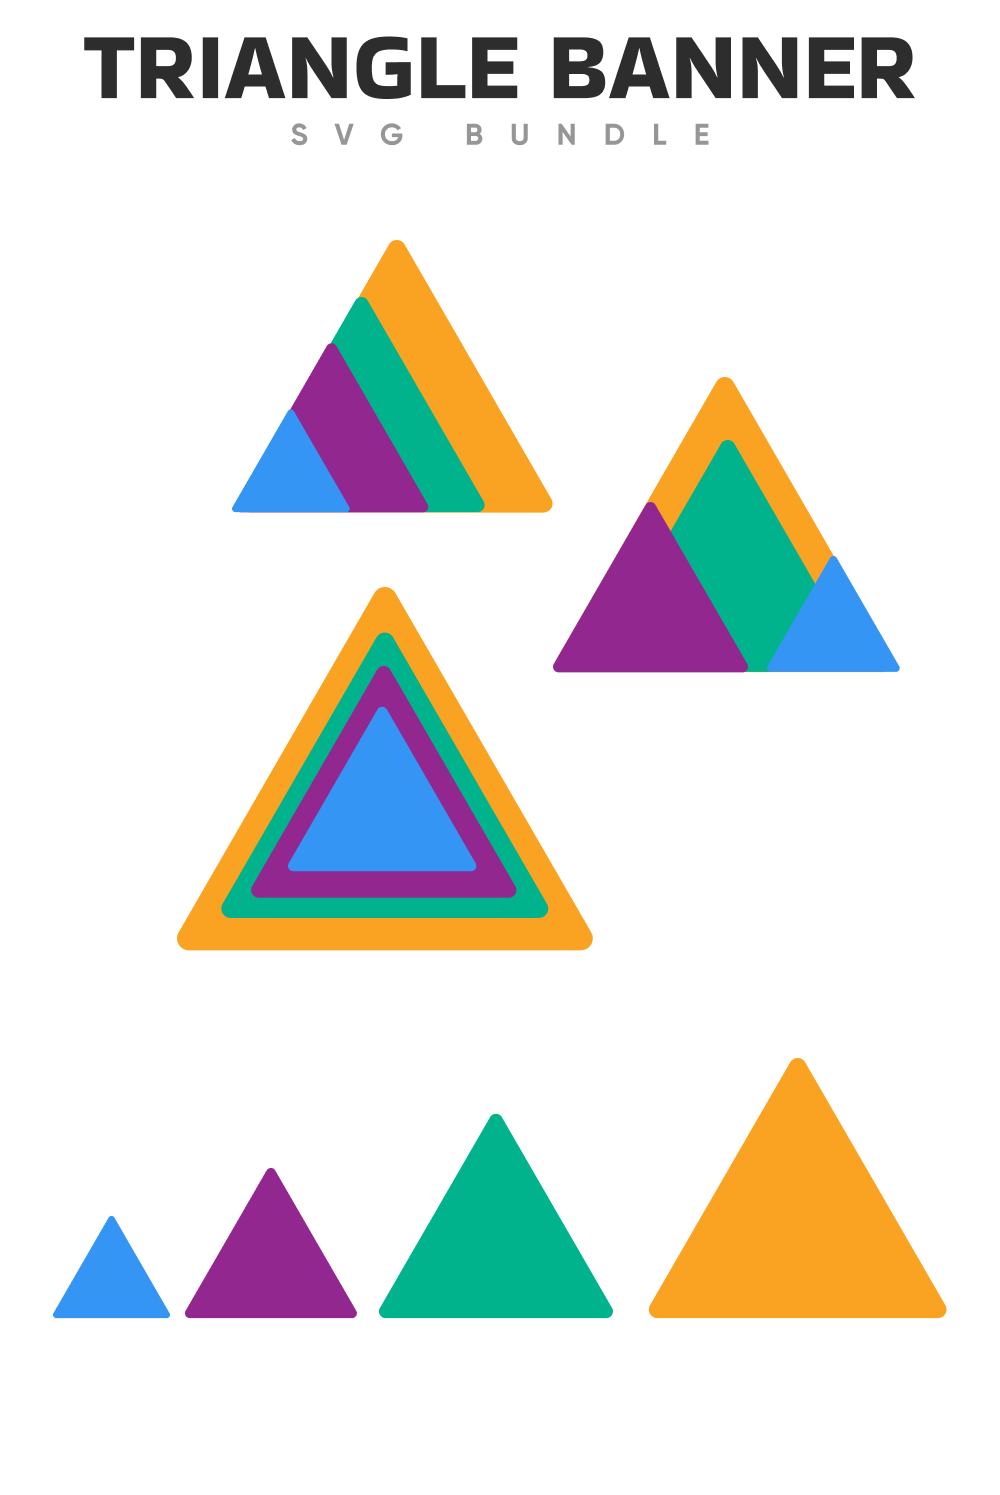 Multicolor triangle banners collection.